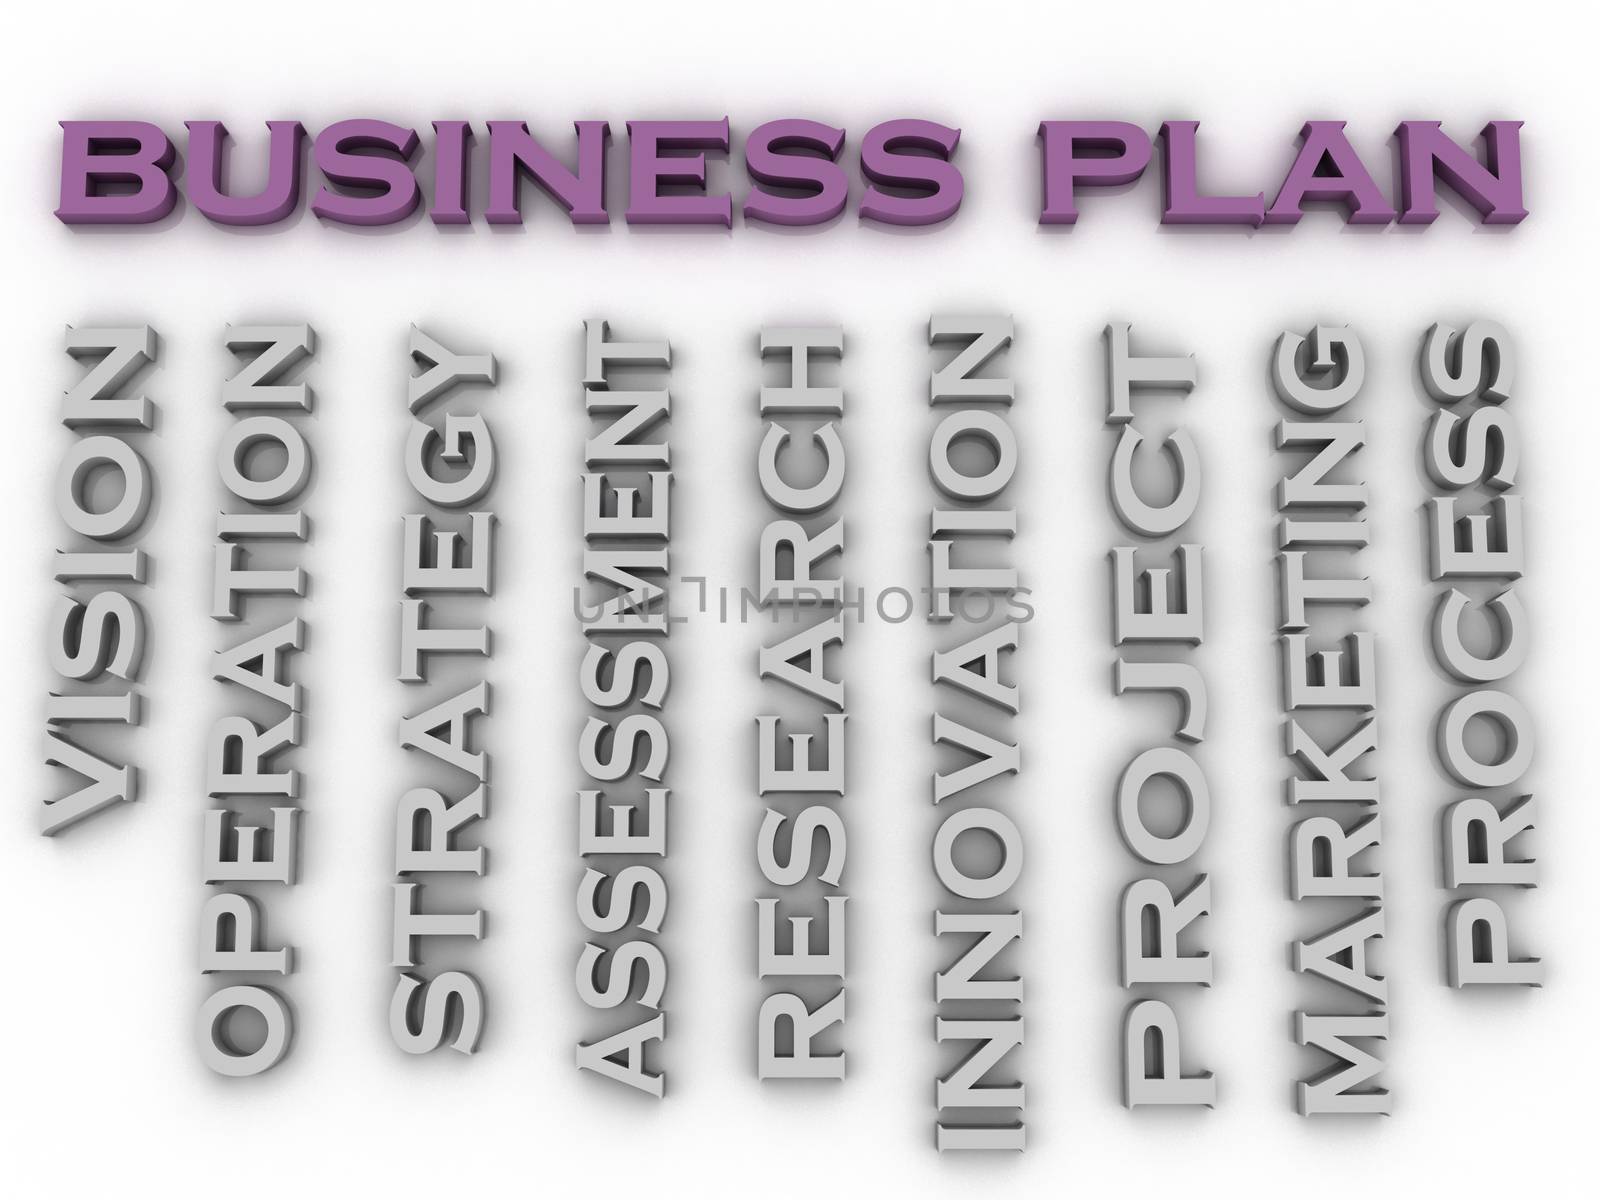 3d image Business plan issues concept word cloud background by dacasdo